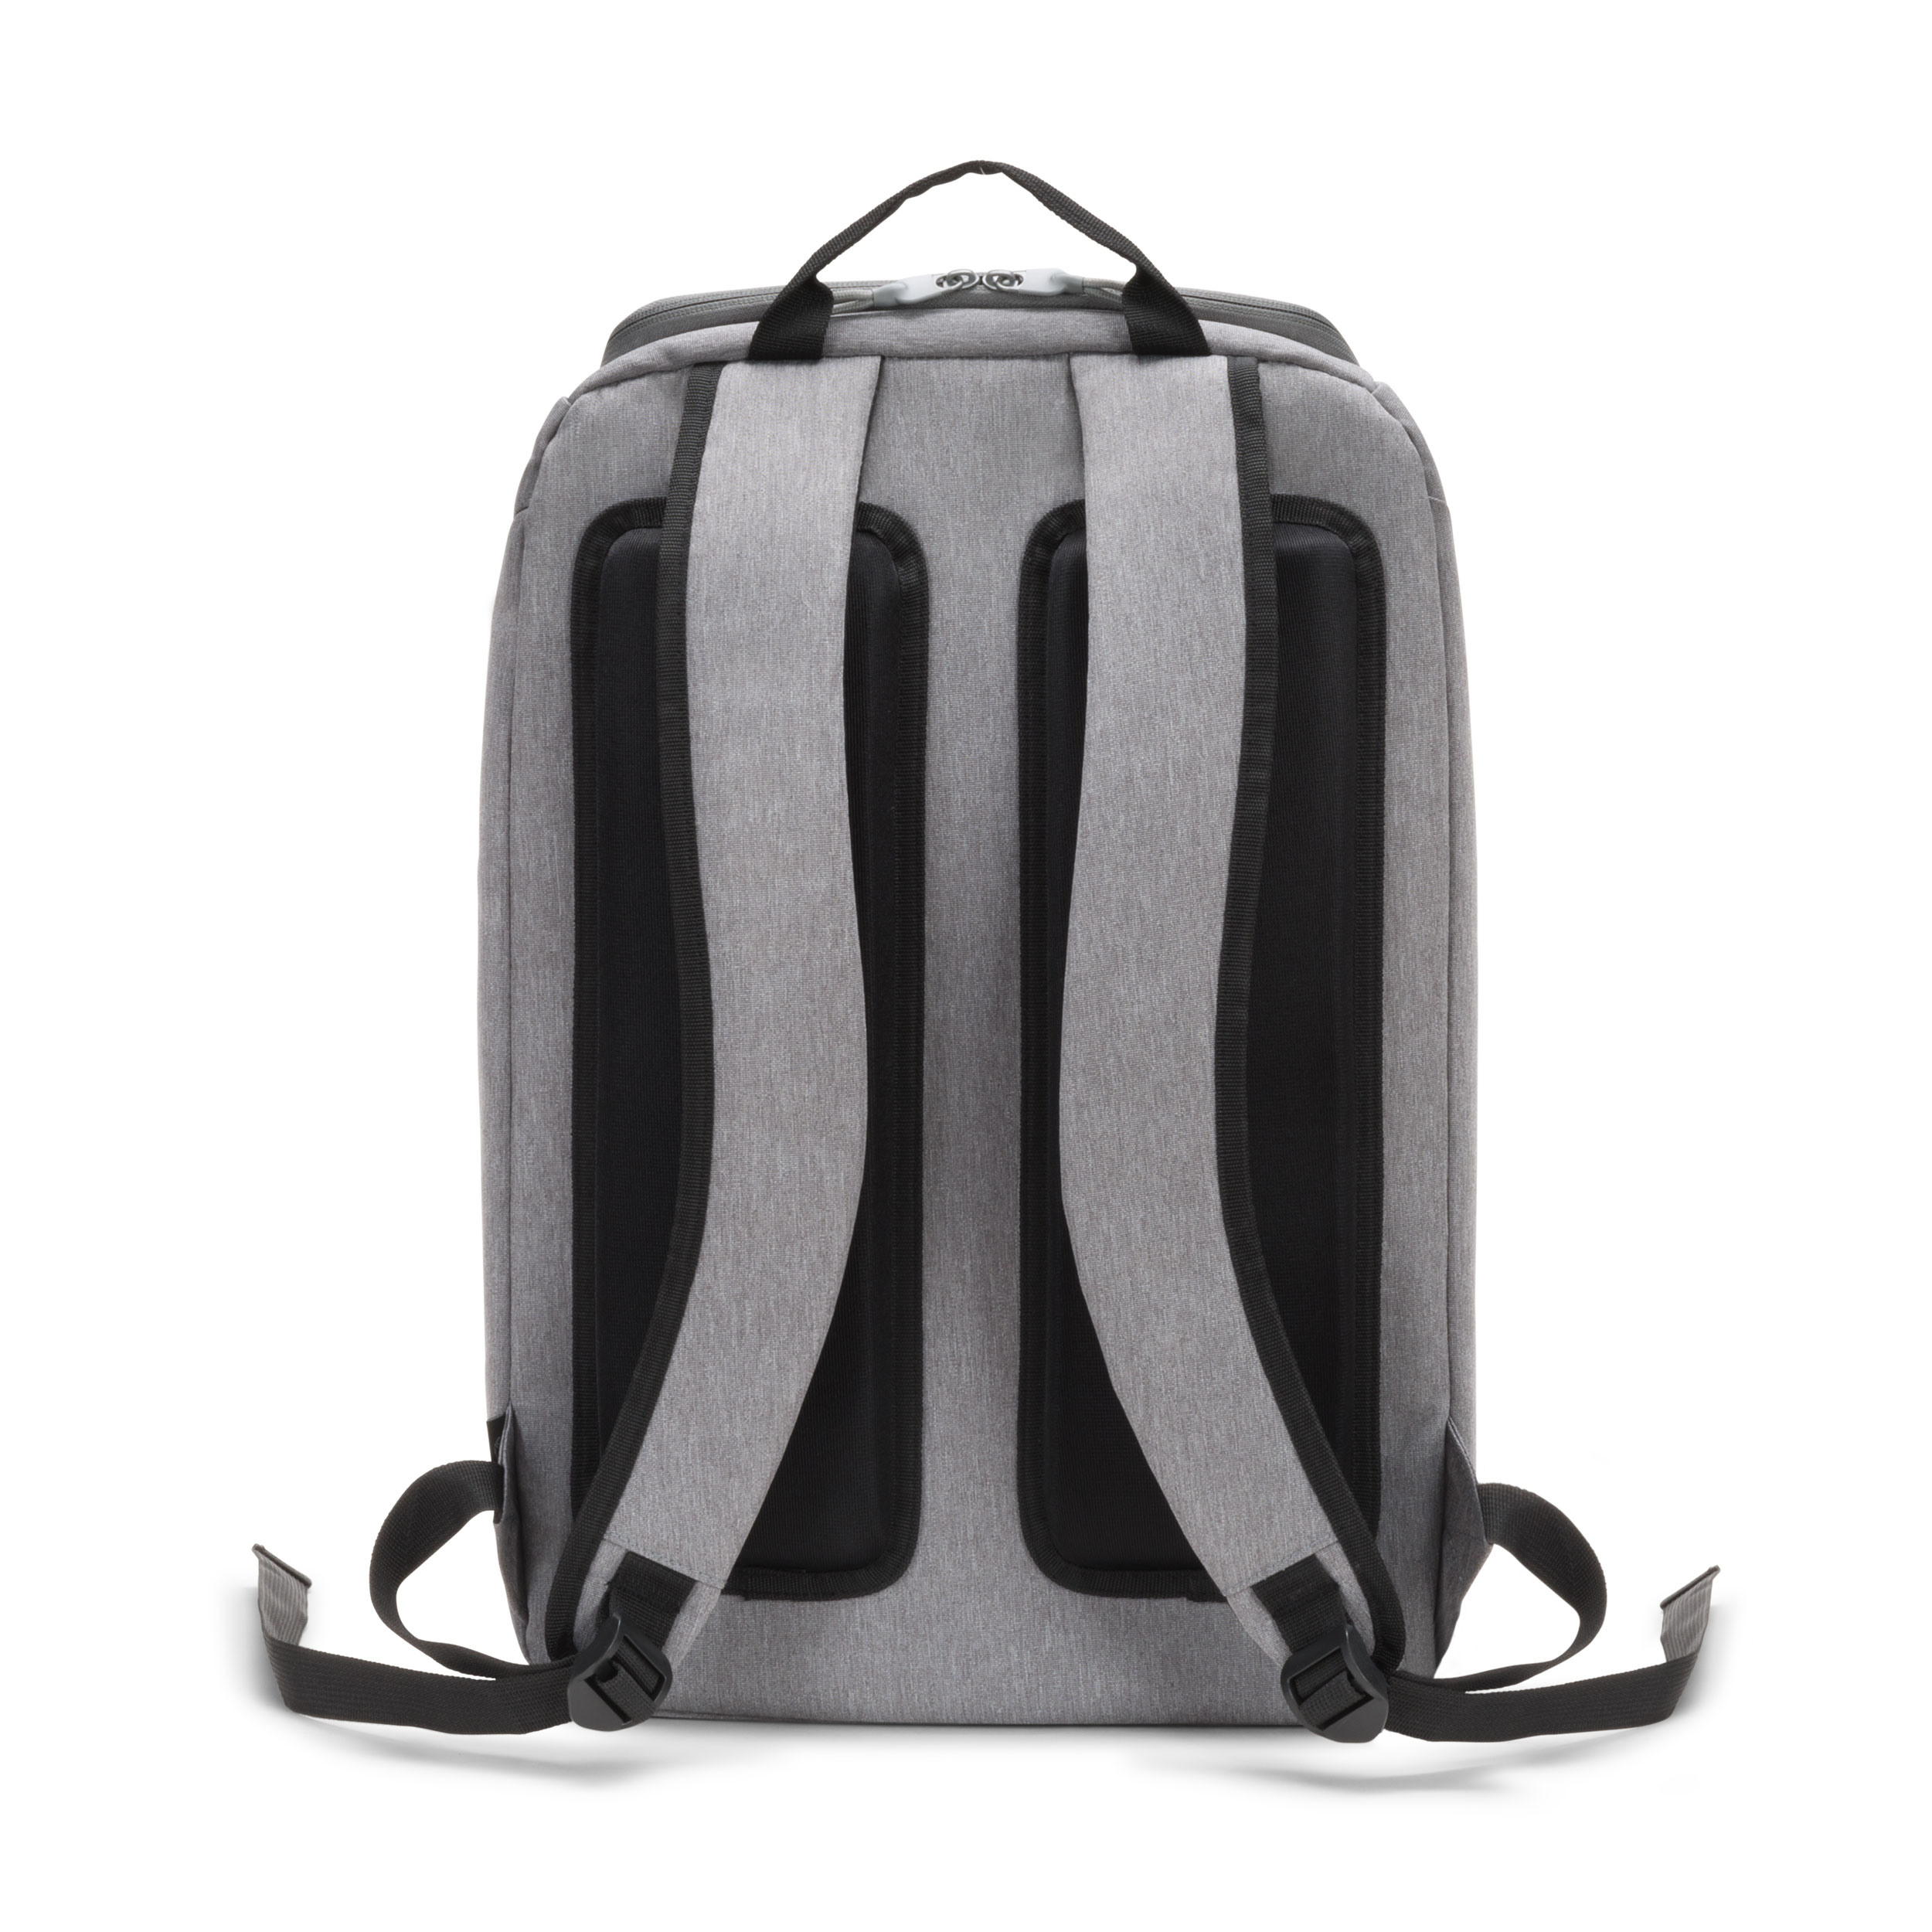 DICOTA Eco Backpack MOTION lgt Grey D31876-RPET for Universal 13 - 15.6 inch